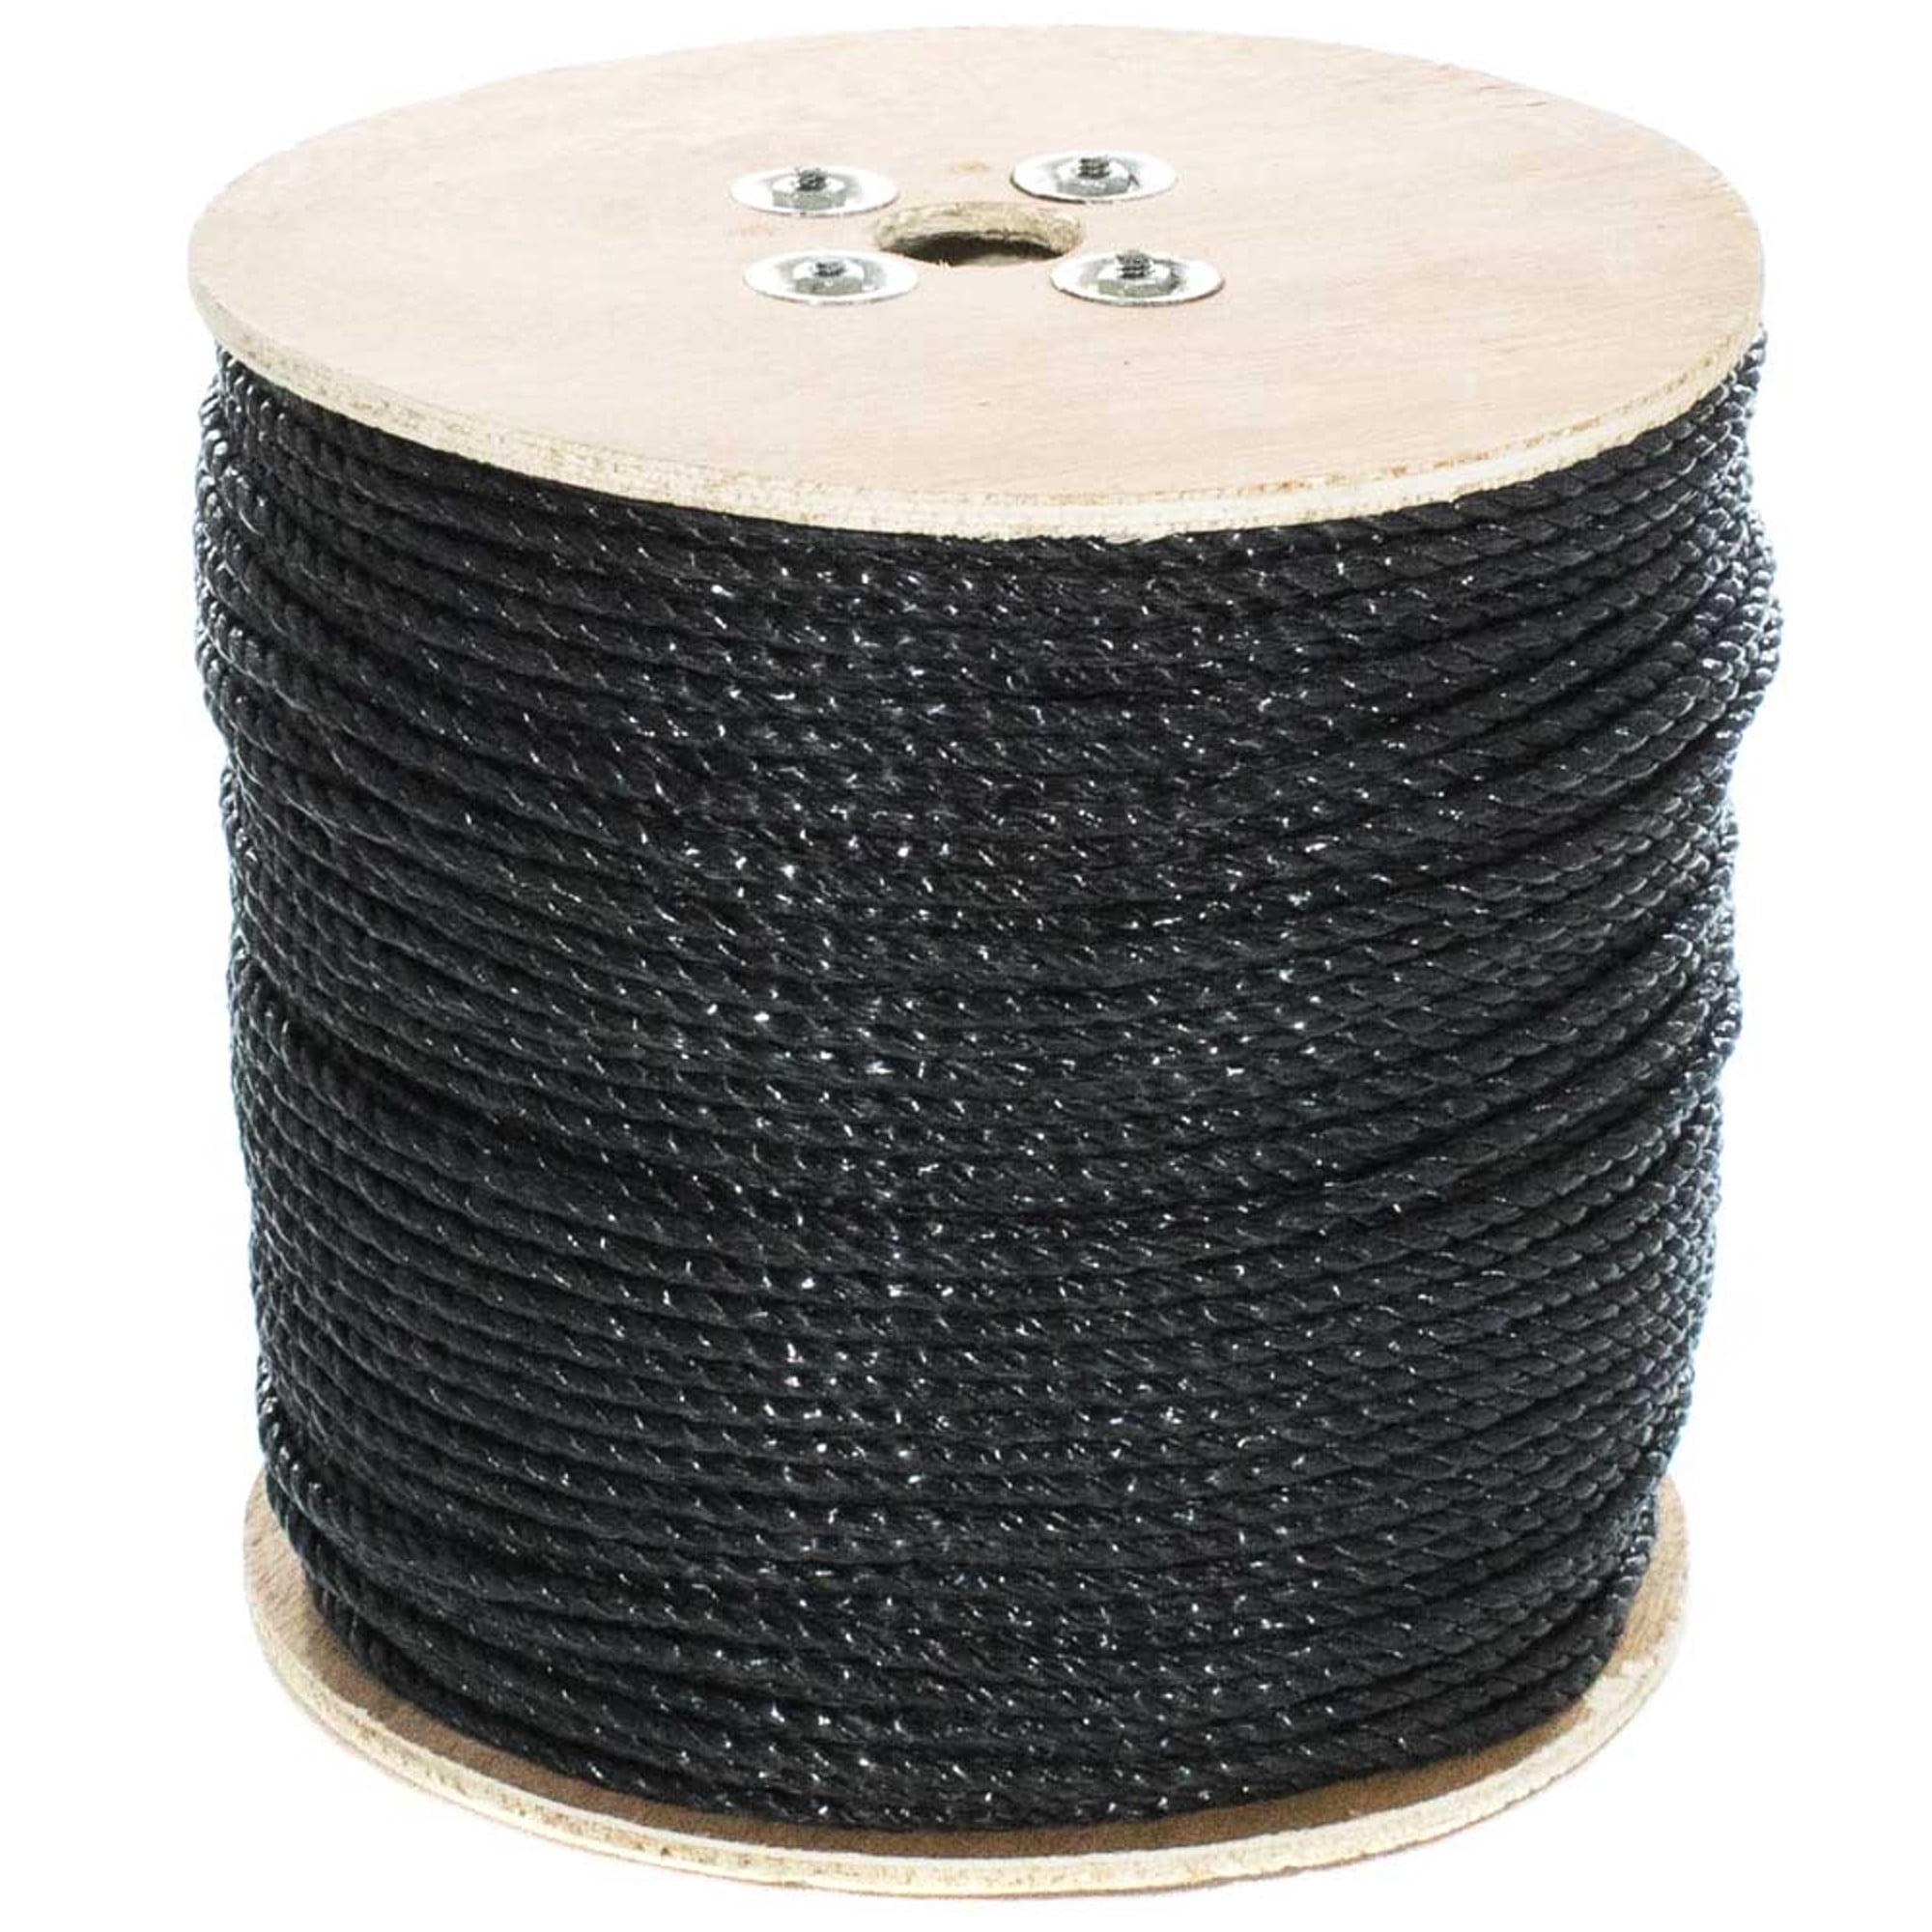 7/8" x 100 ft hollow/flat braid polyester rope .Black/Tan.US Made 